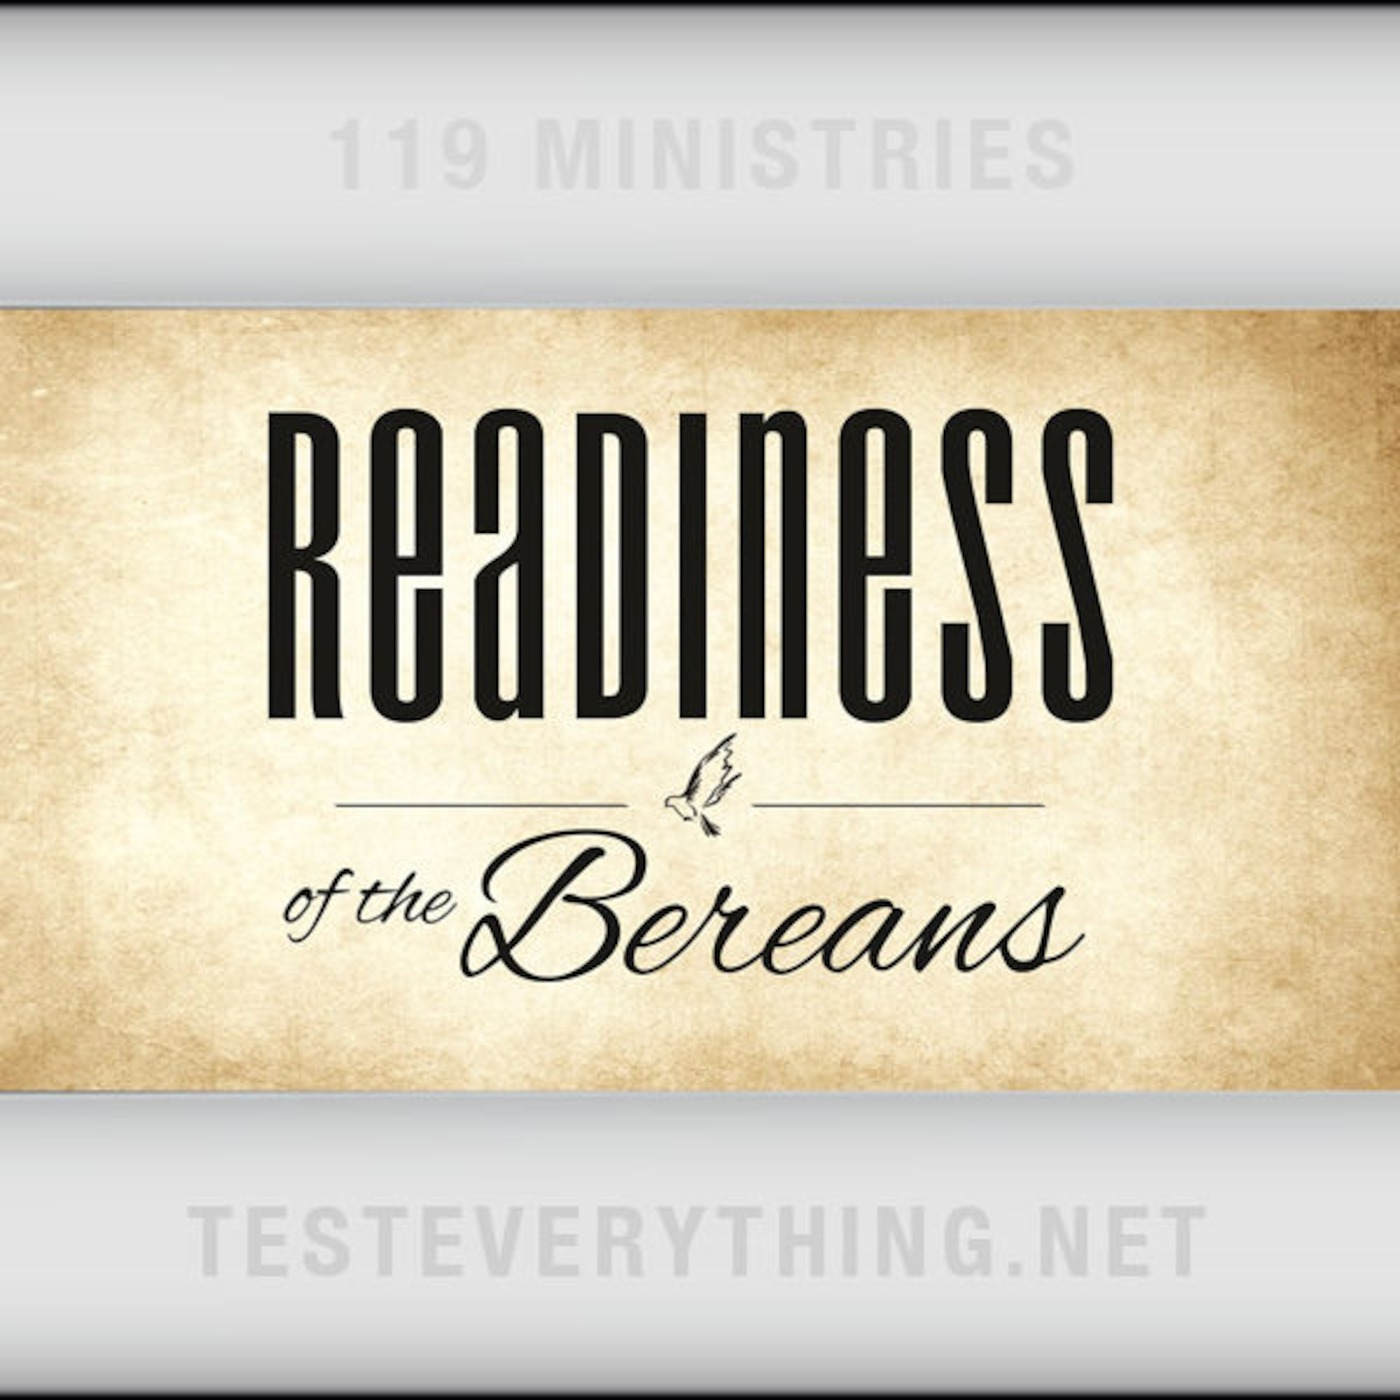 119 Thoughts - Readiness of the Bereans